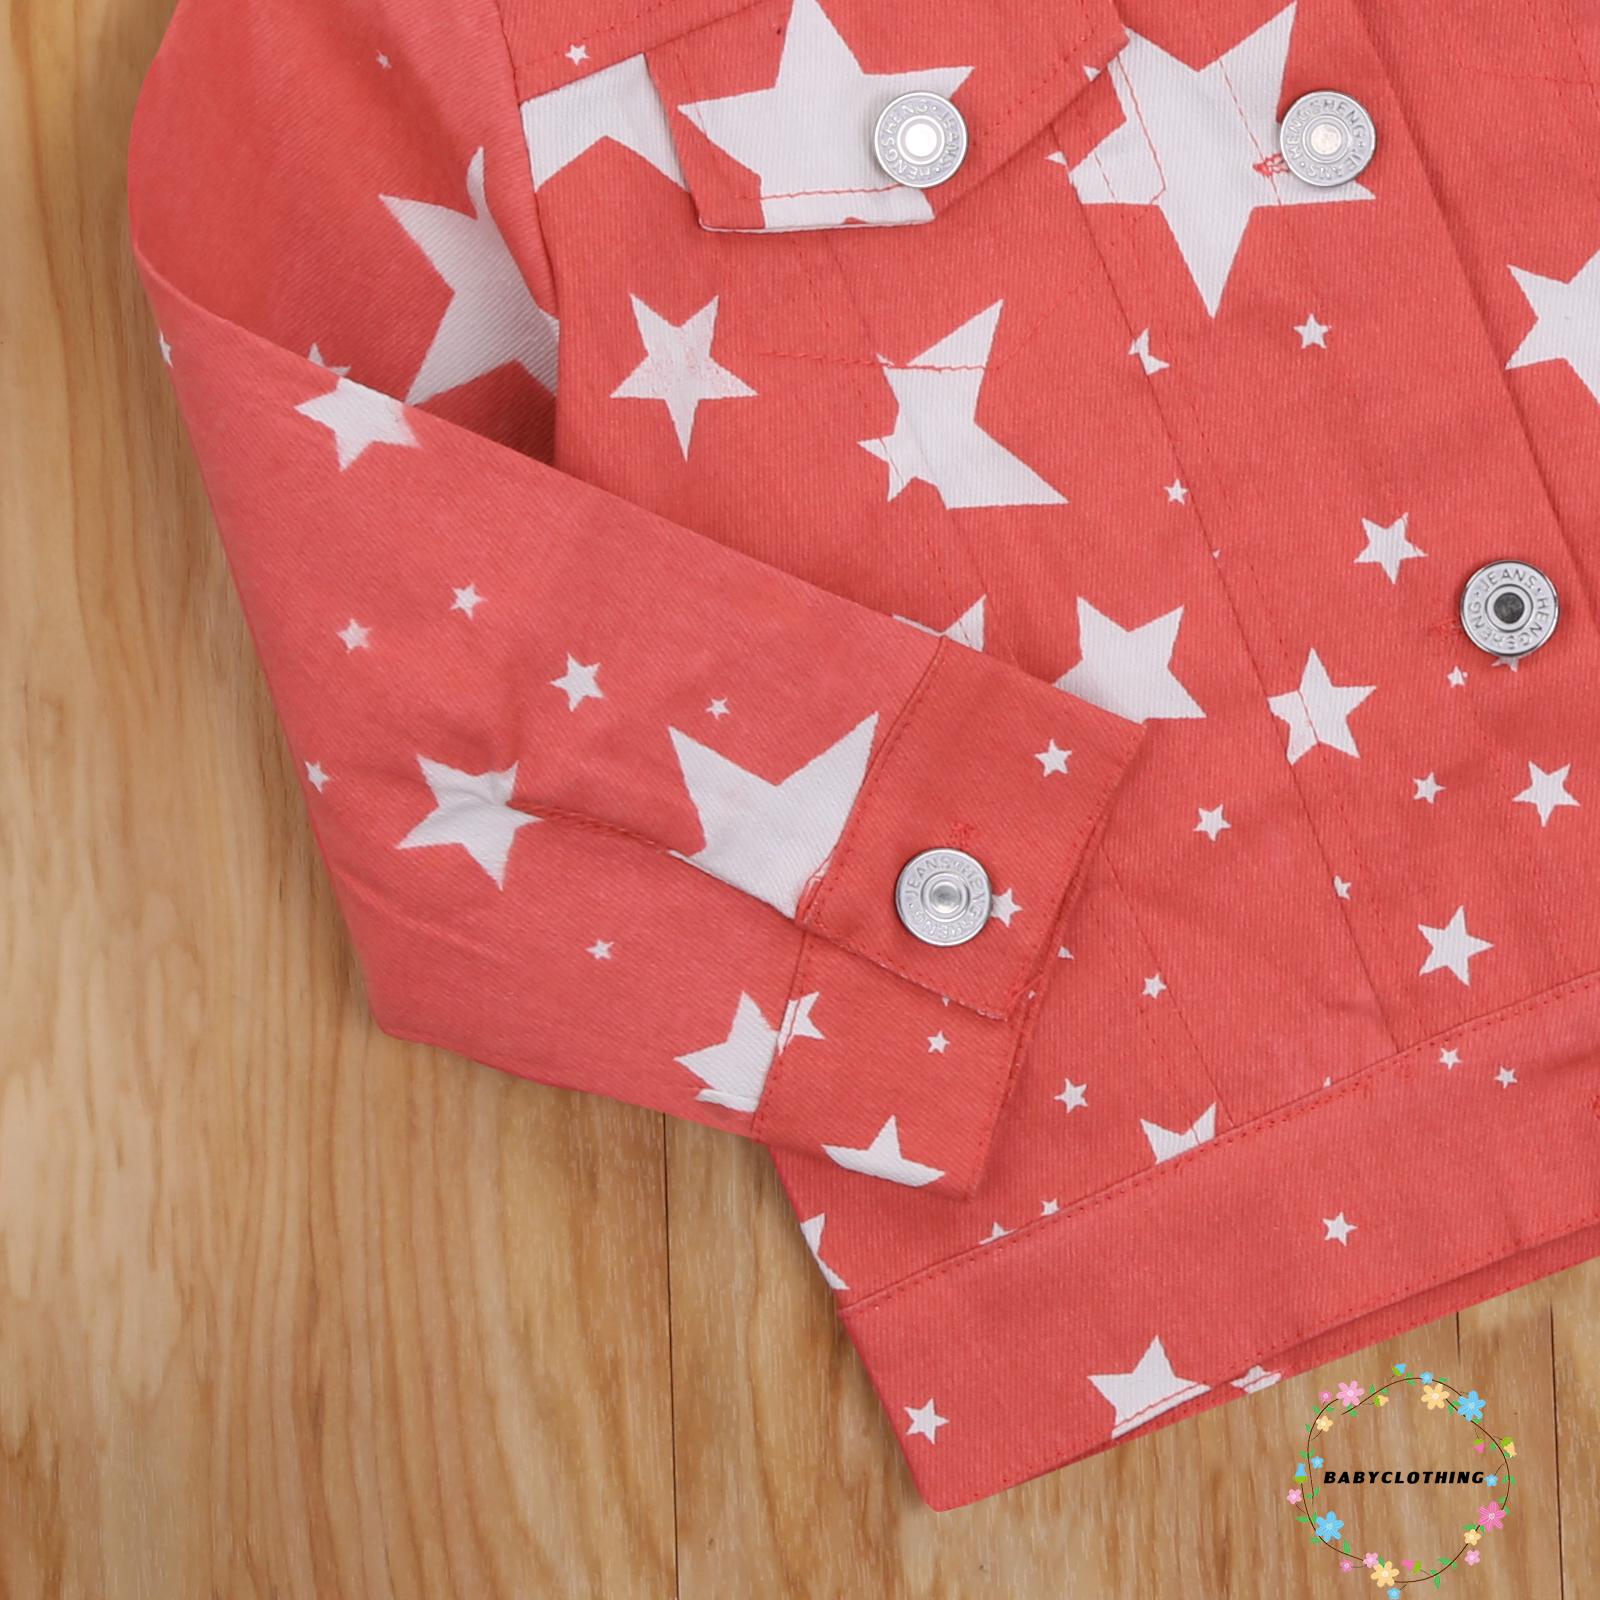 BBCQ-Children´s Jacket, Girl´s Lapel Long Sleeve Top Star Printed Pattern Autumn Coat for Boys